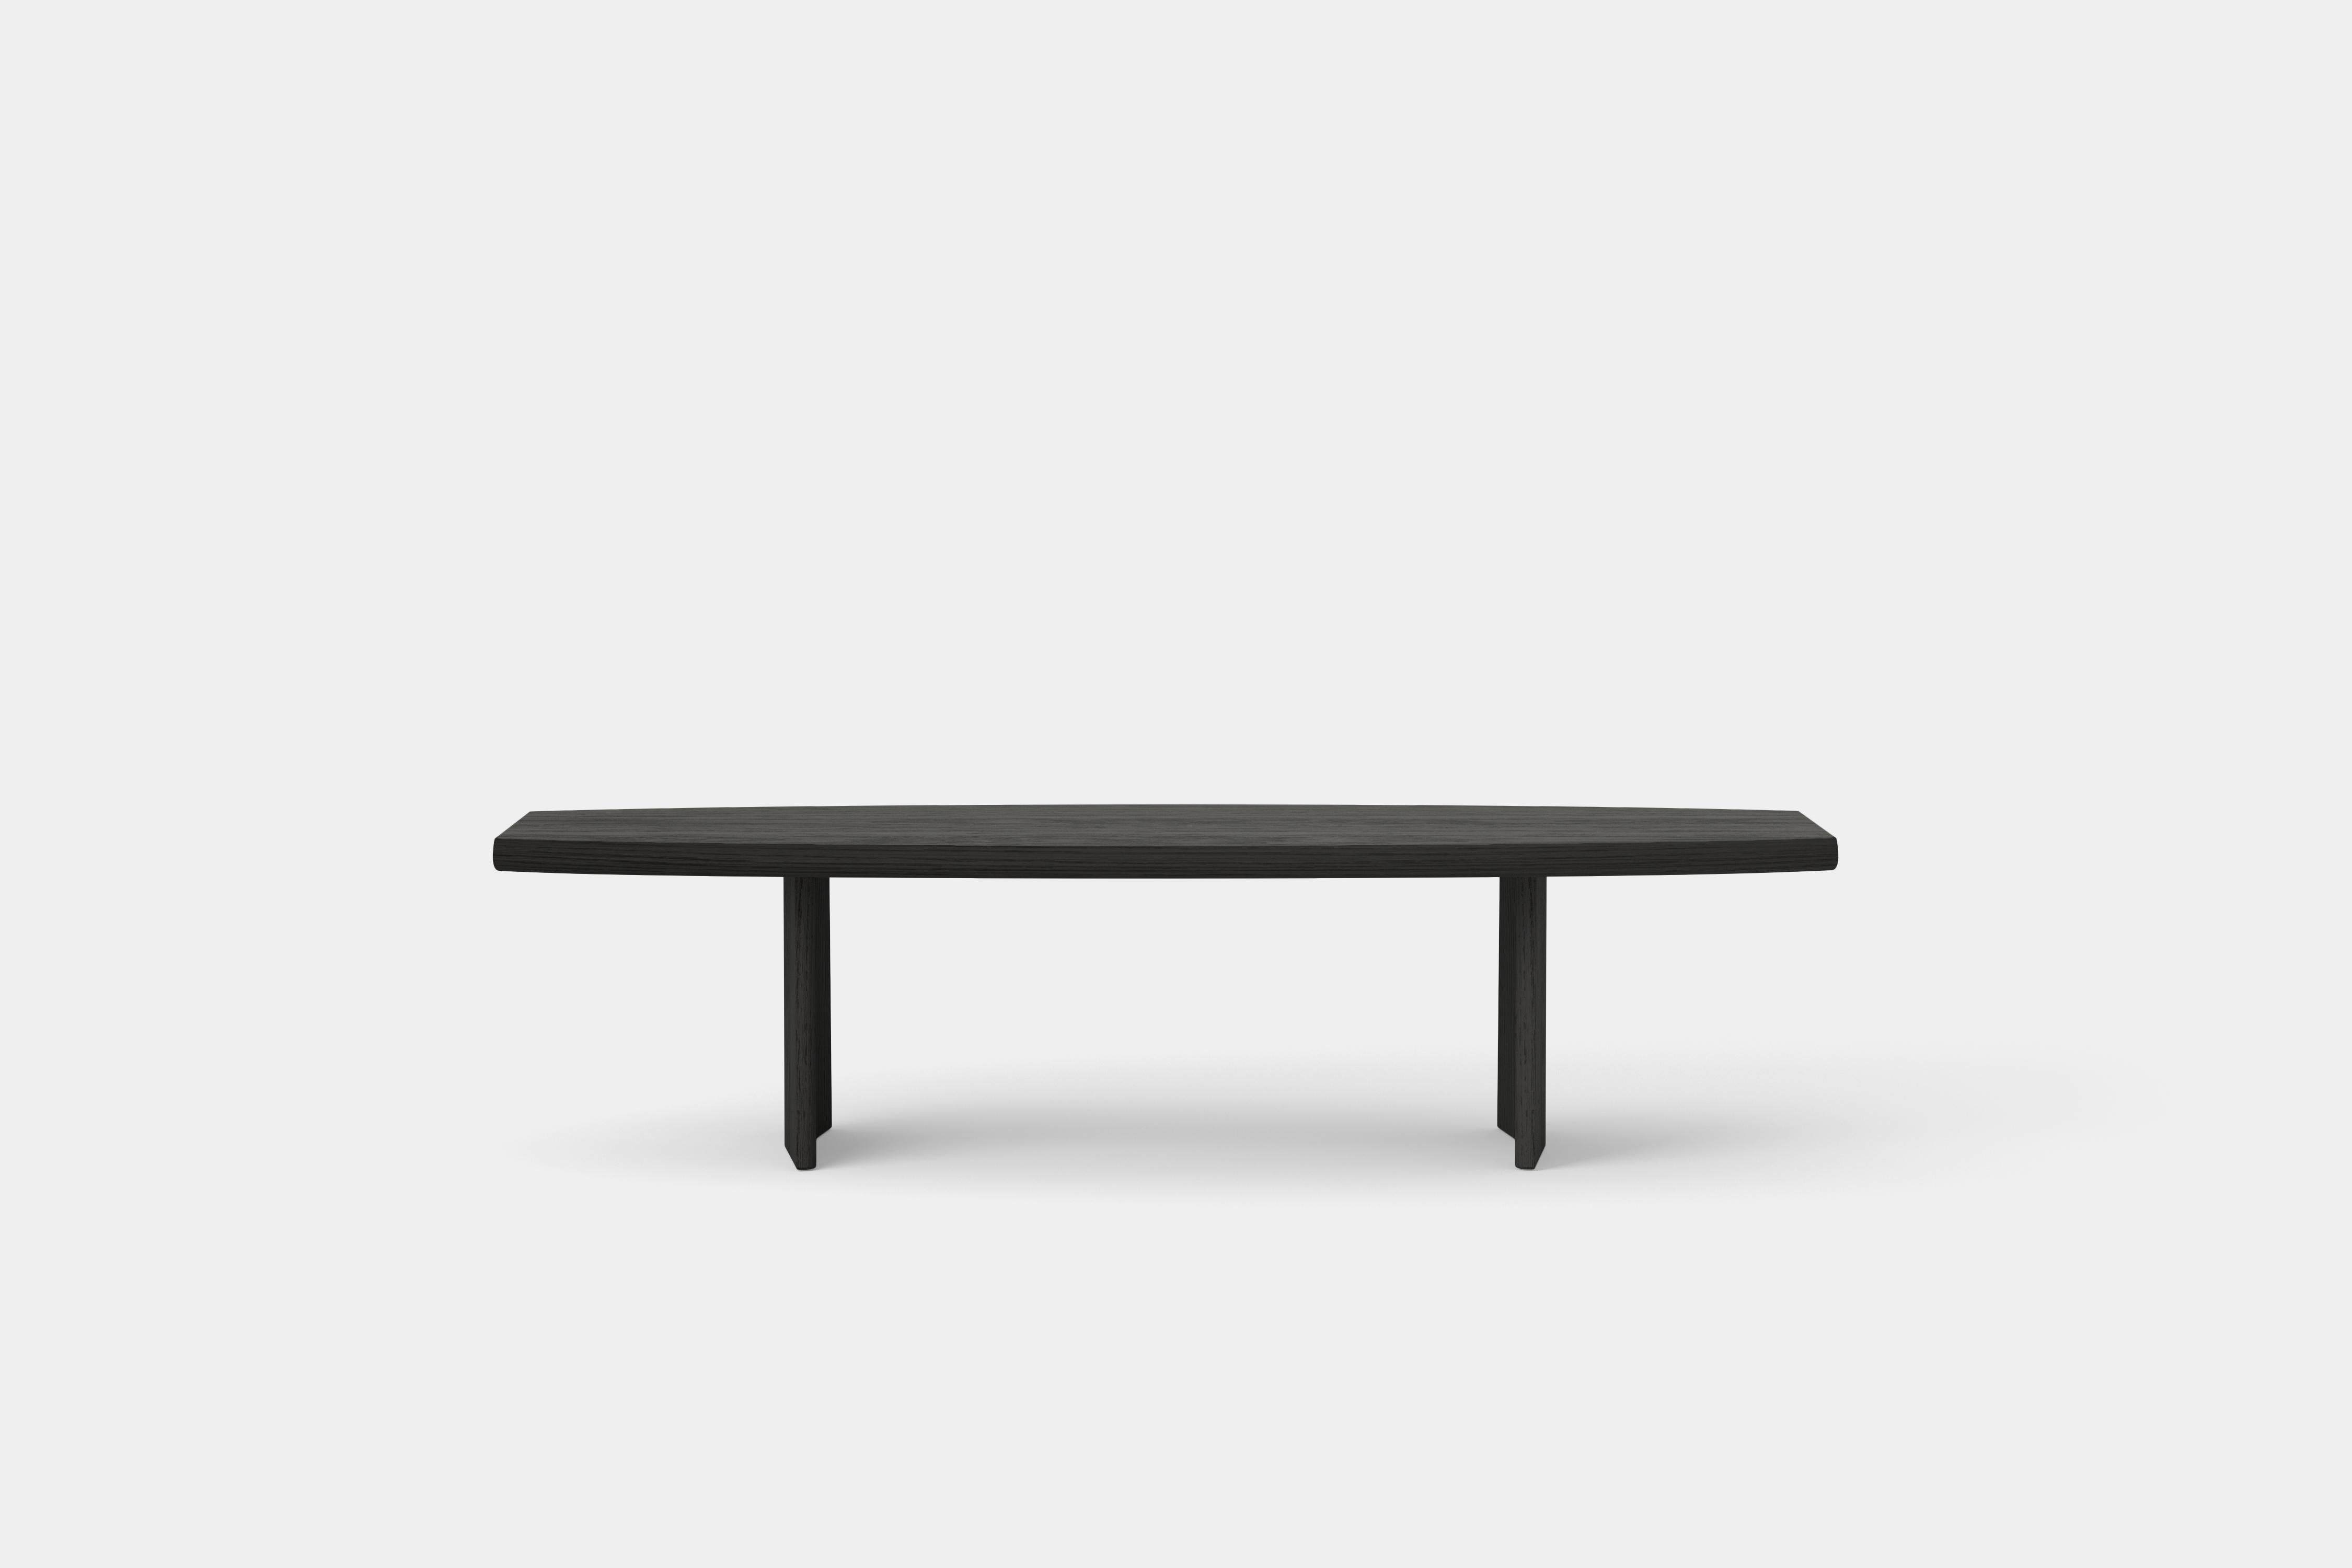 Mexican Peana Coffee Table, Bench in Black Tinted Solid Wood Finish by Joel Escalona For Sale